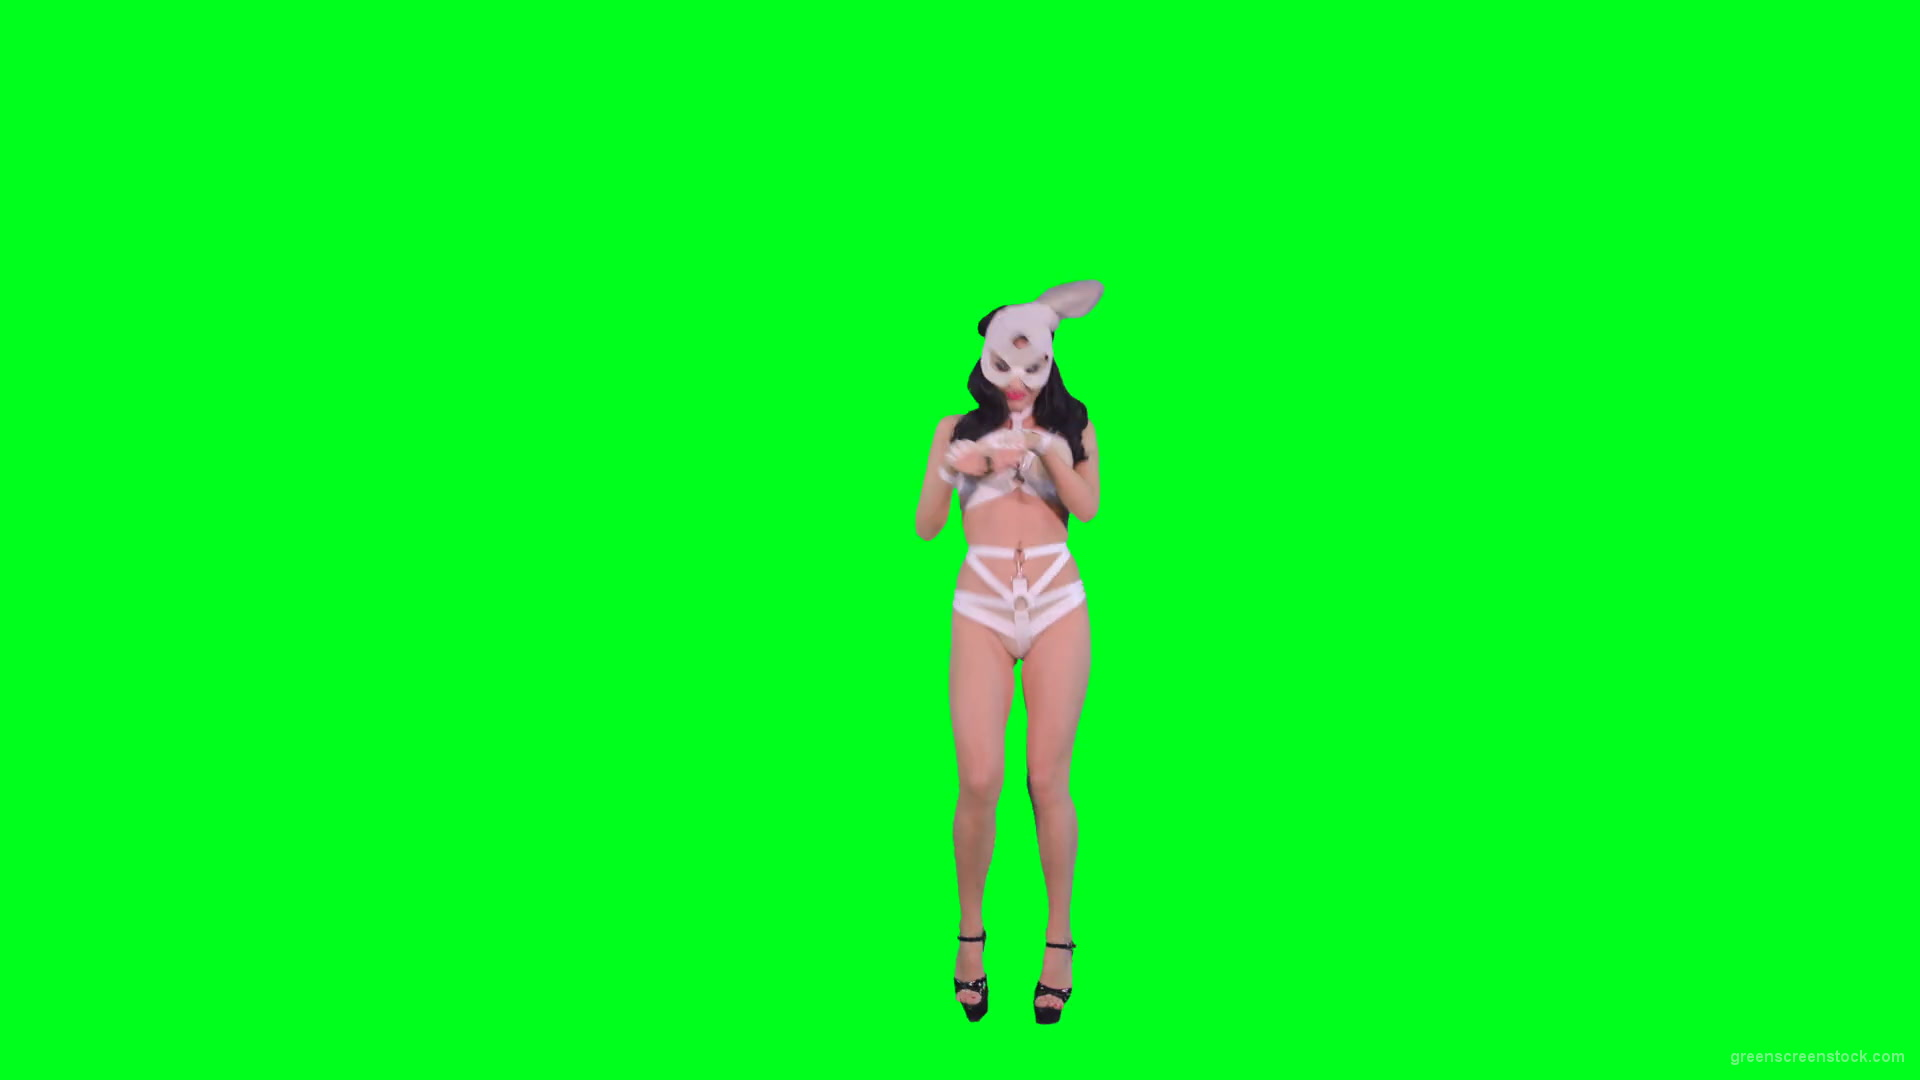 Hot-Go-go-Dancing-girl-is-jumping-over-green-screen-4K-Video-Footage-1920_008 Green Screen Stock